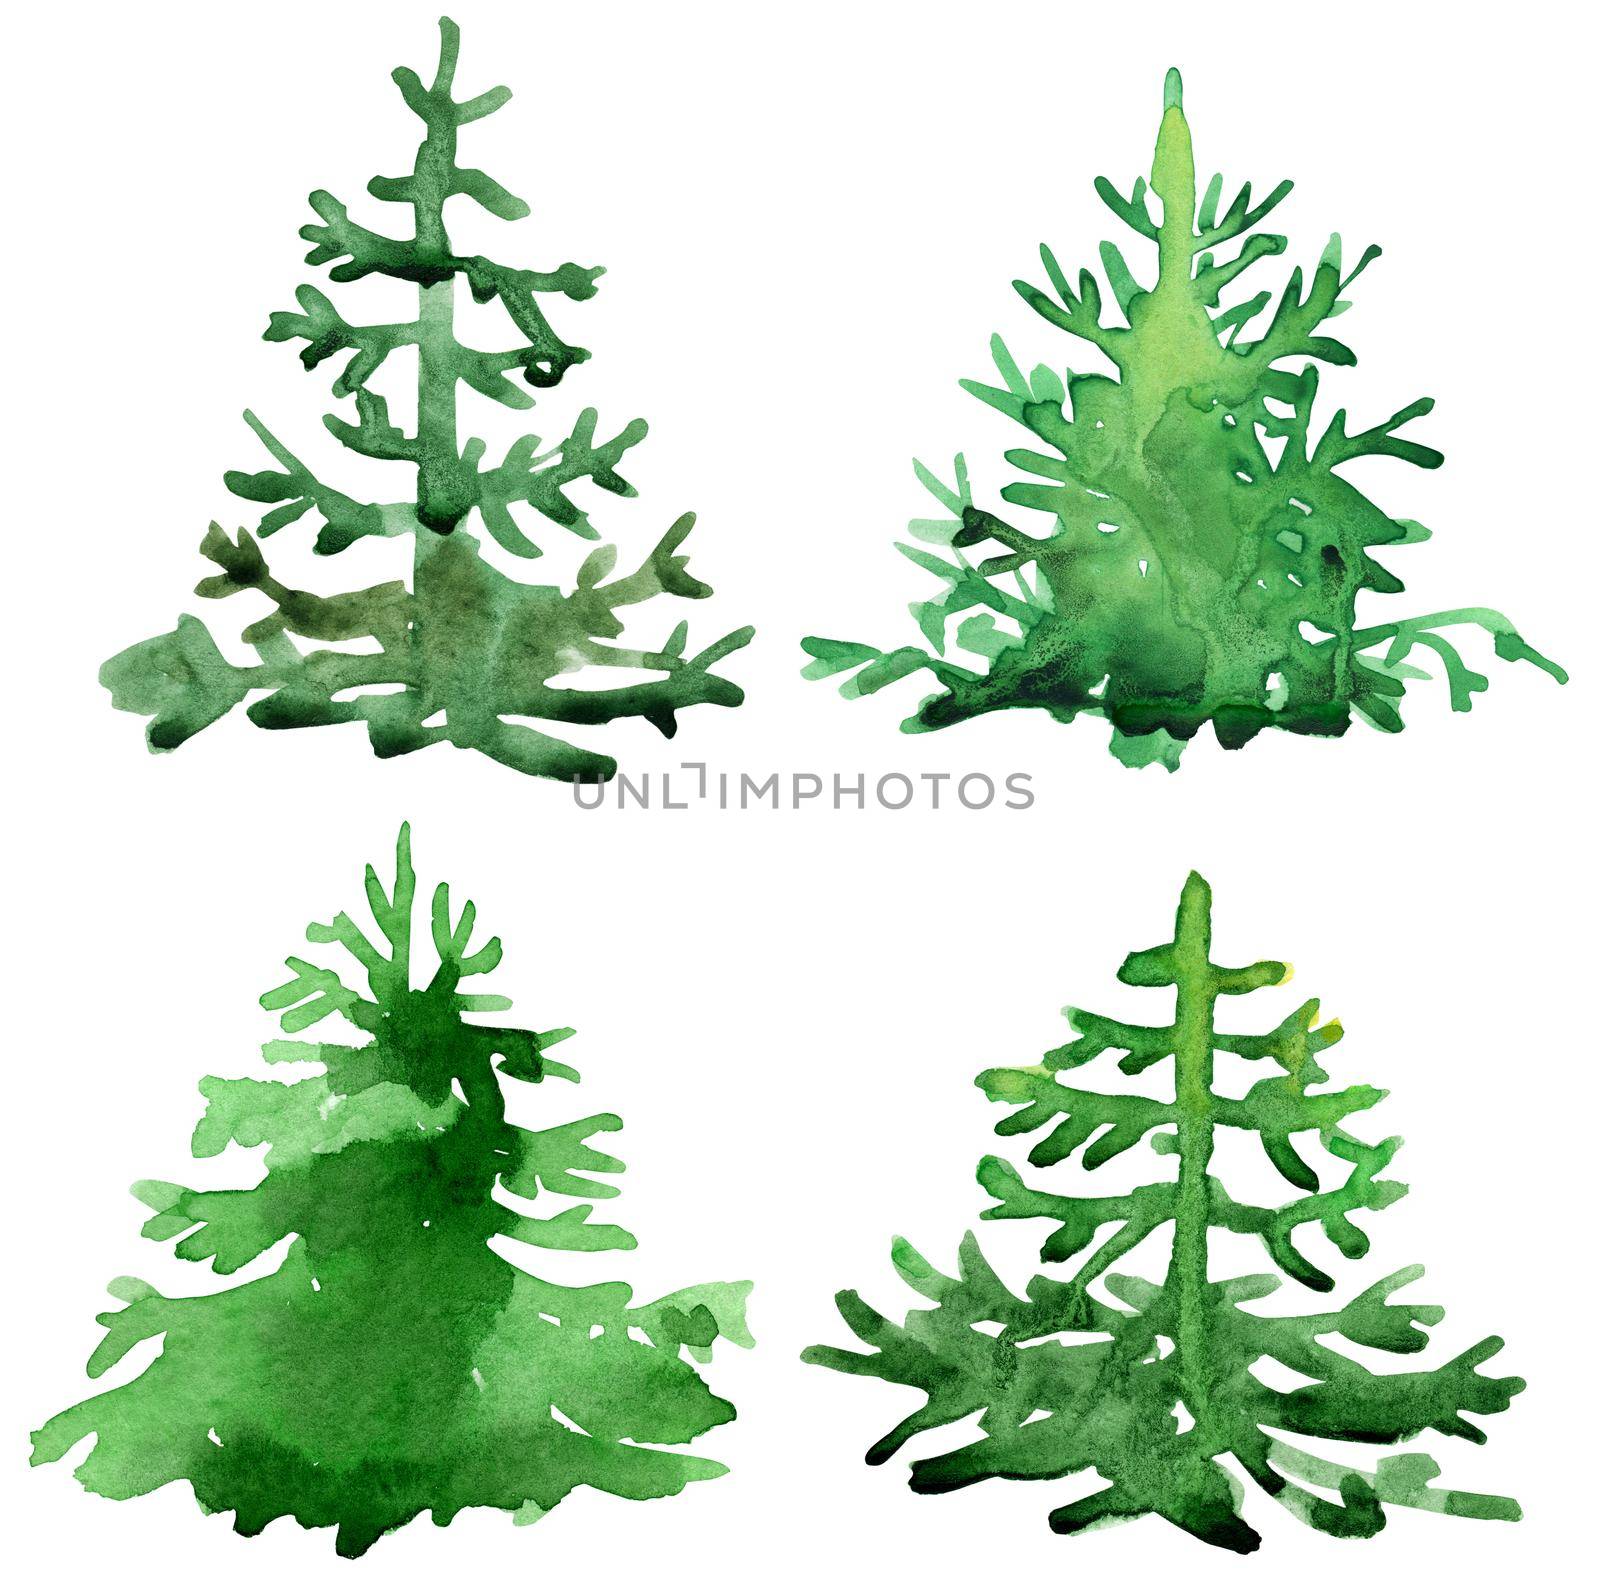 Green fir trees drawing by watercolor, isolated forest element, conifer tree, hand drawn illustration